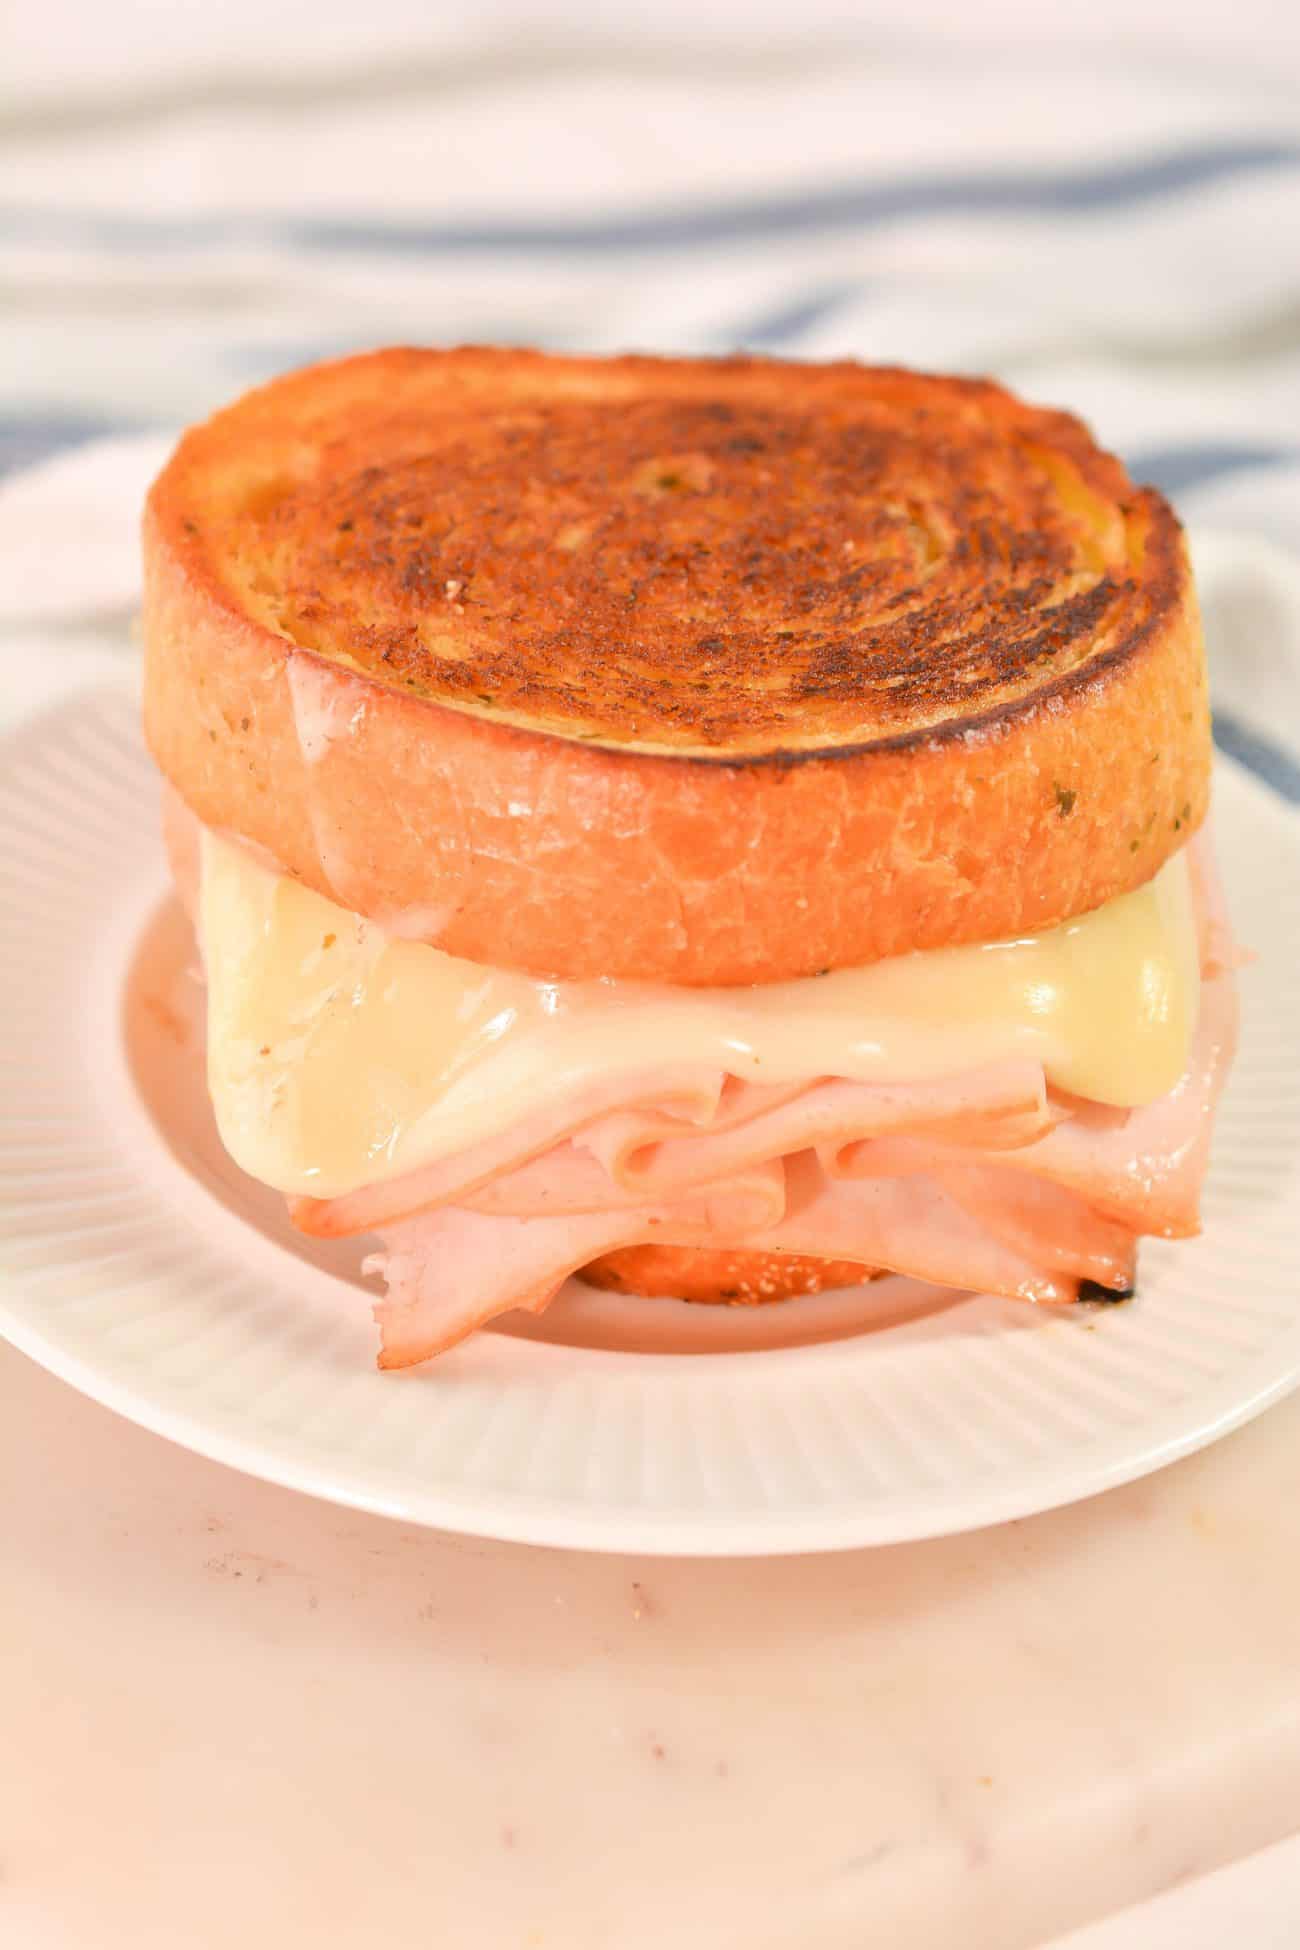 Grilled Turkey and Cheese Sandwich